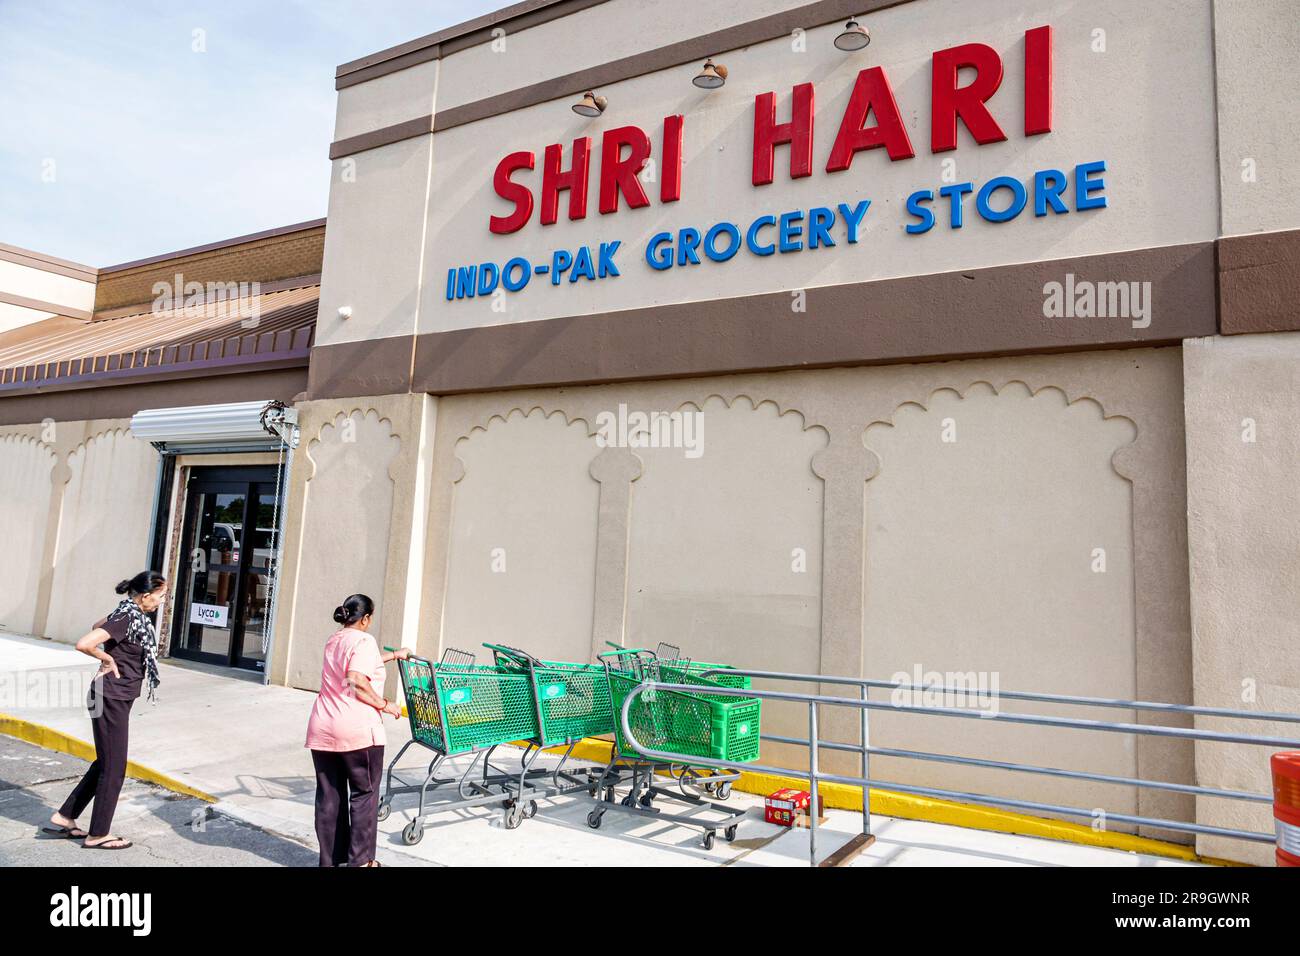 Macon Georgia,Shri Hari Indo-Pak Grocery Store,Asian imported foods,women shopping carts outside exterior,building buildings,front entrance Stock Photo